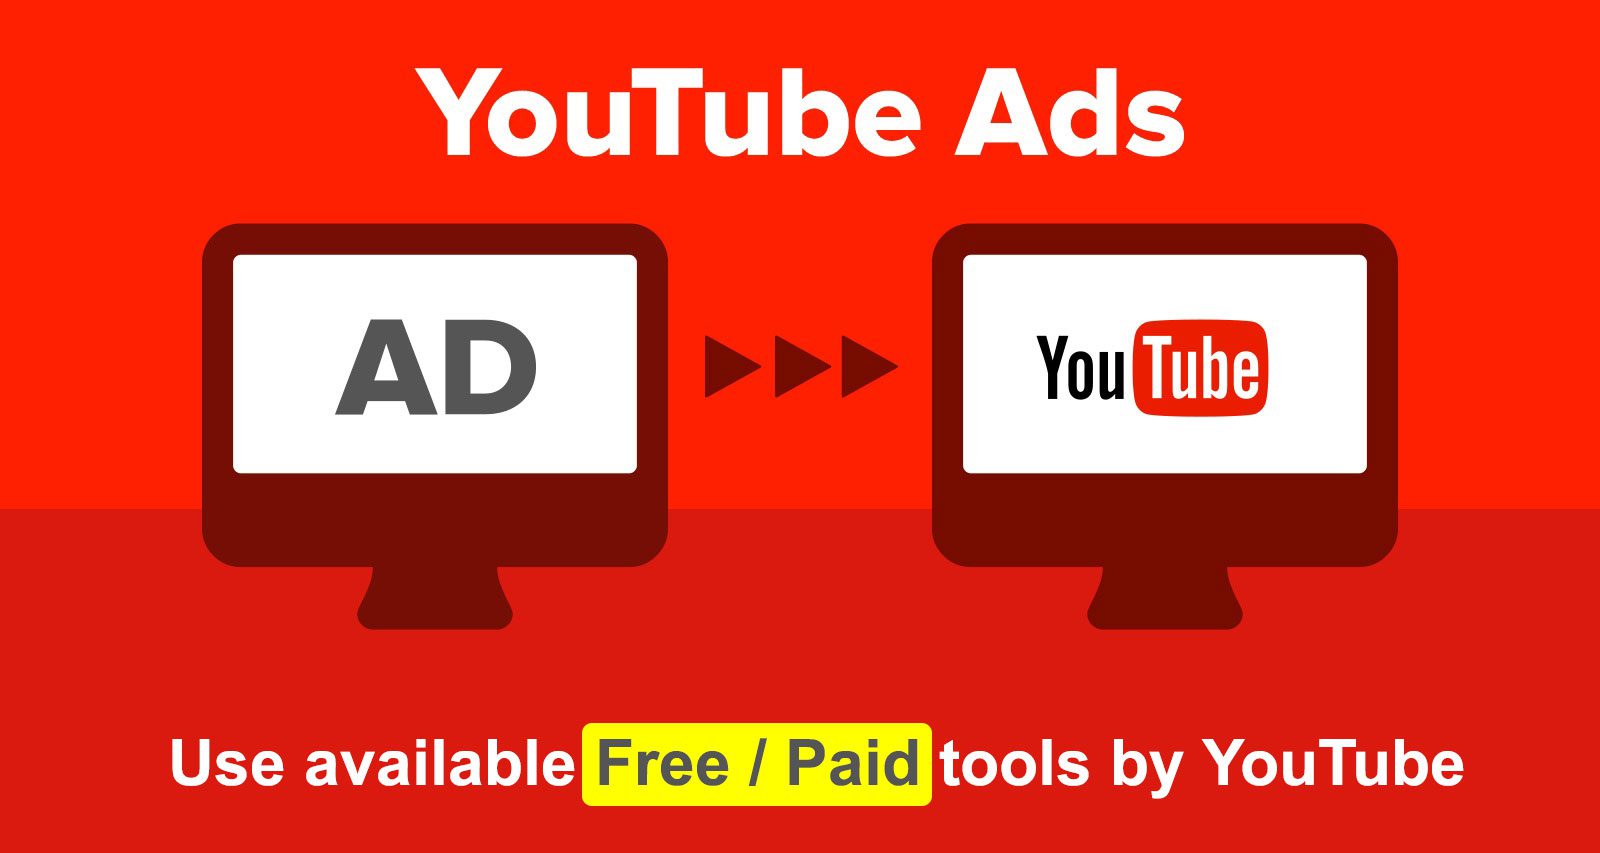 Use available free/paid tools by YouTube